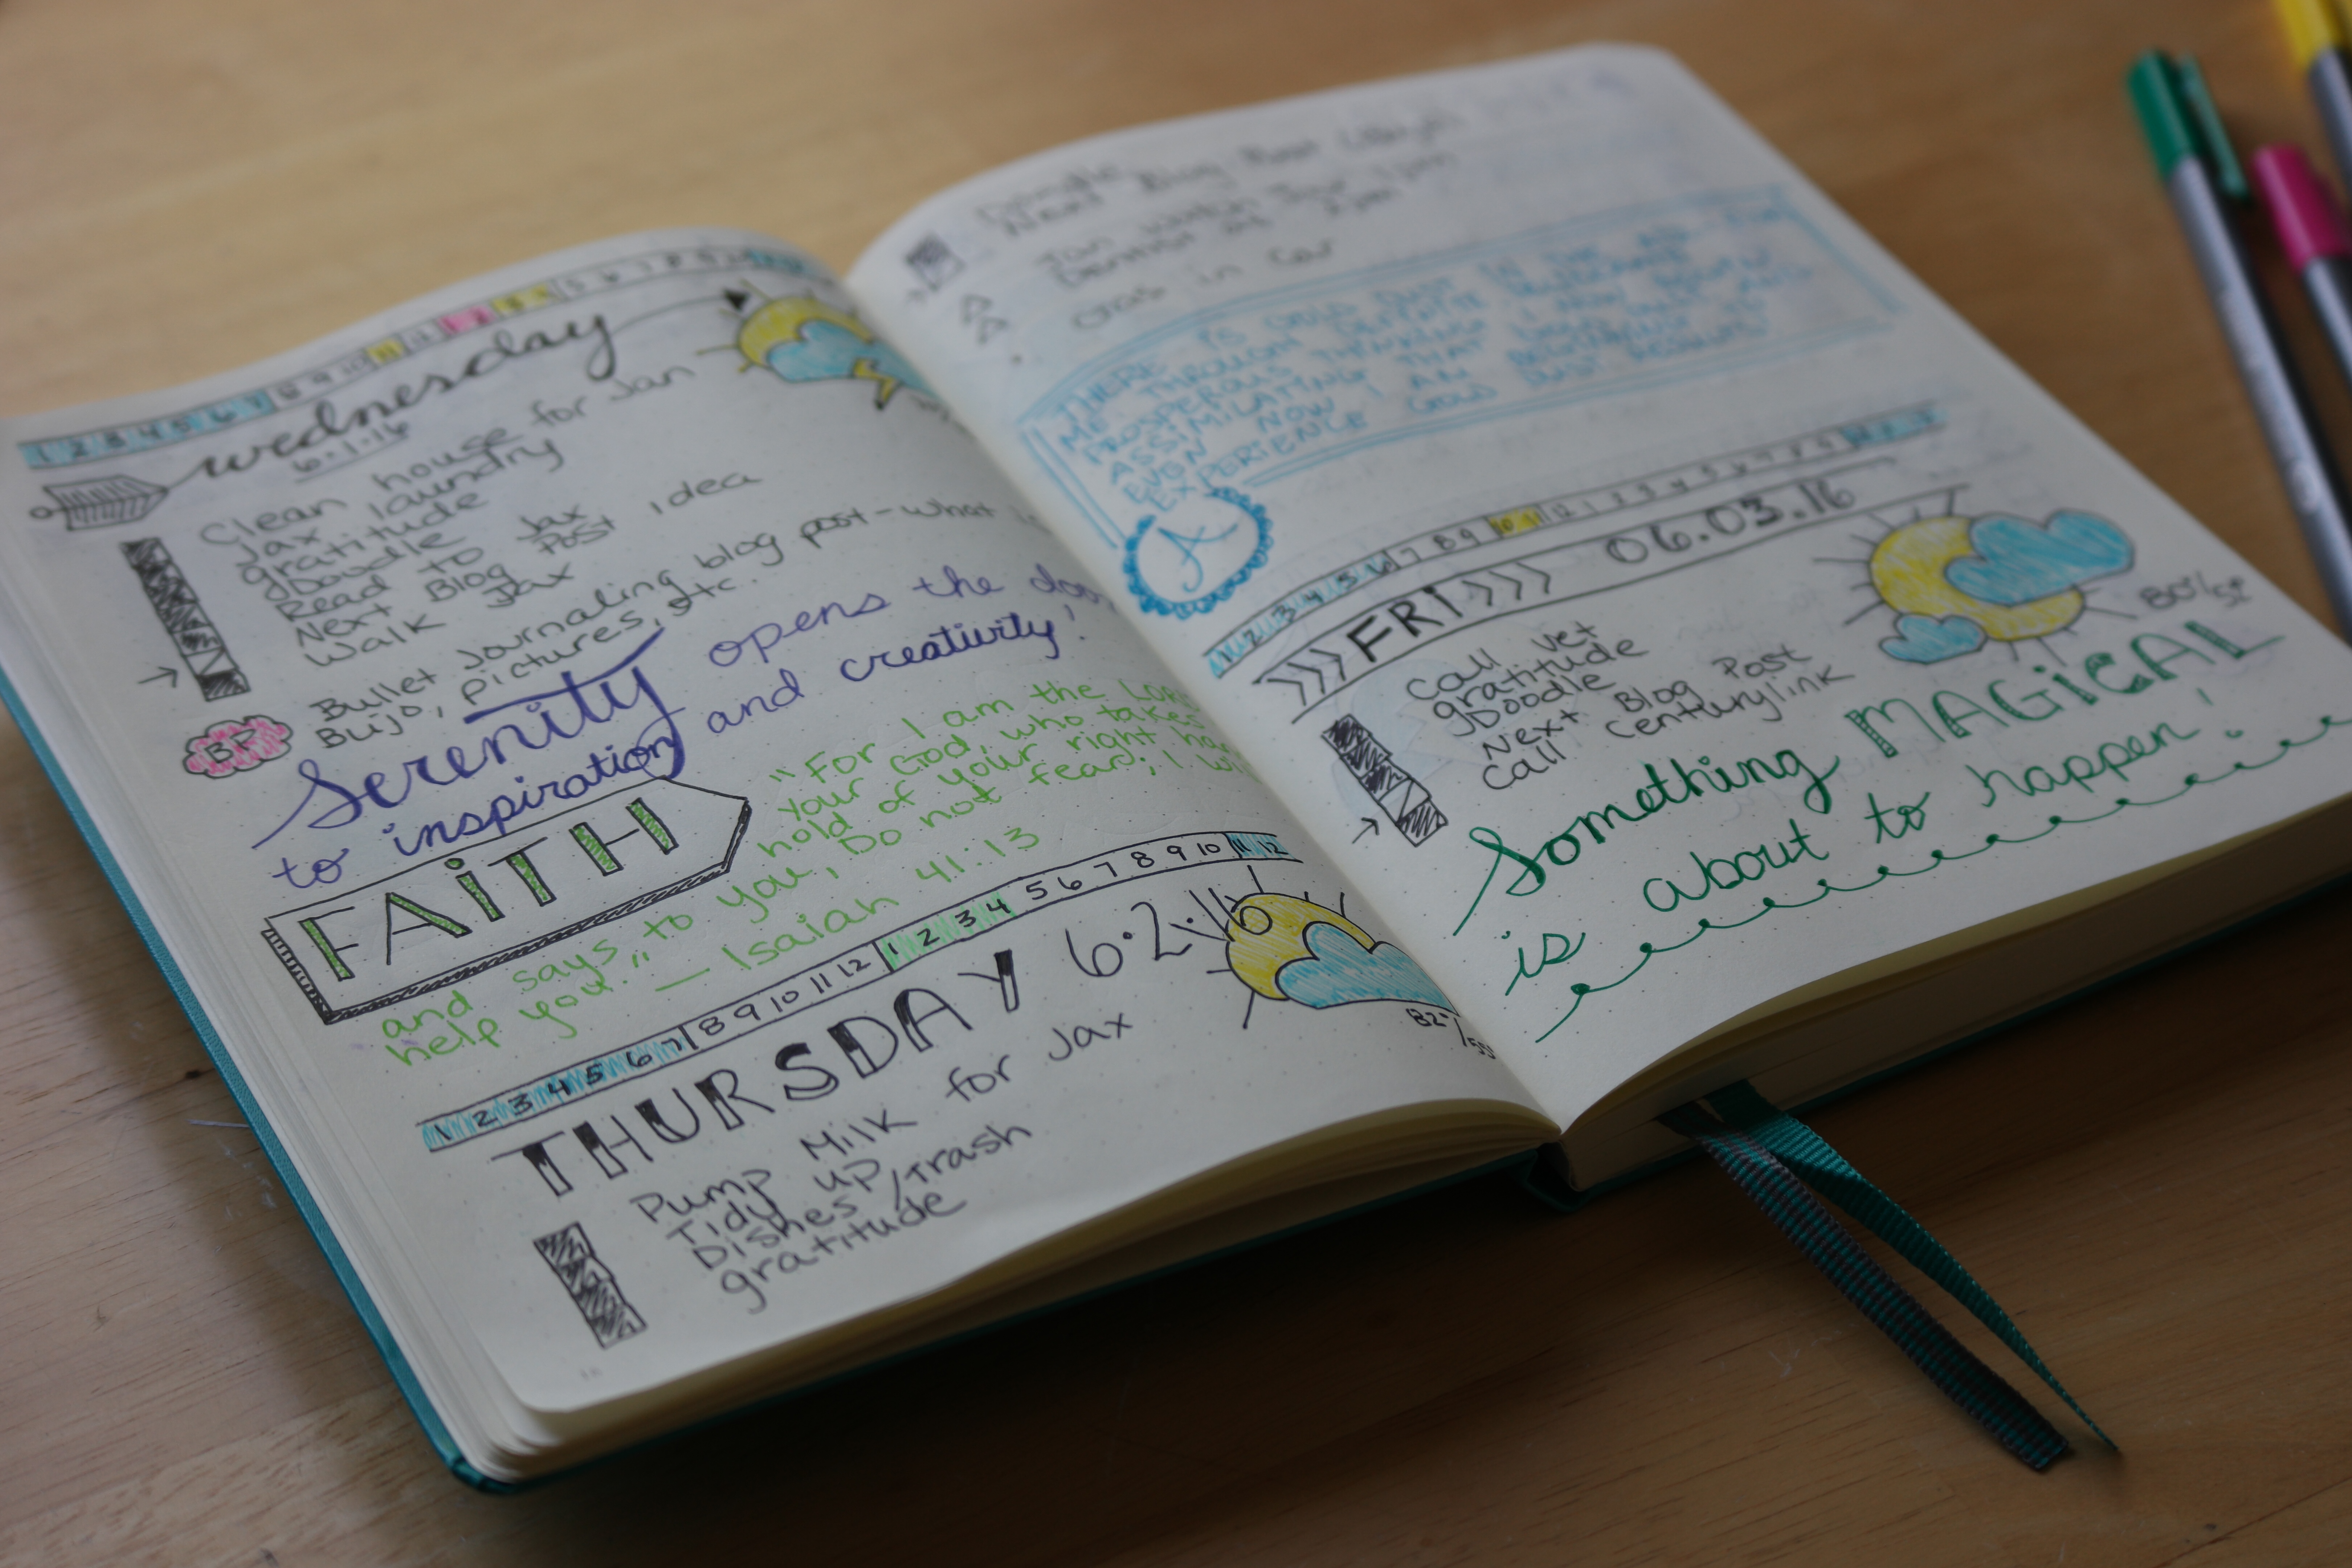 Let's flip through my 2021 bullet journal! (Sound on! 📣) Bullet journaling  has been such a positive tool for both my productivity and anxiety,  using, By Lauren Heim Studio